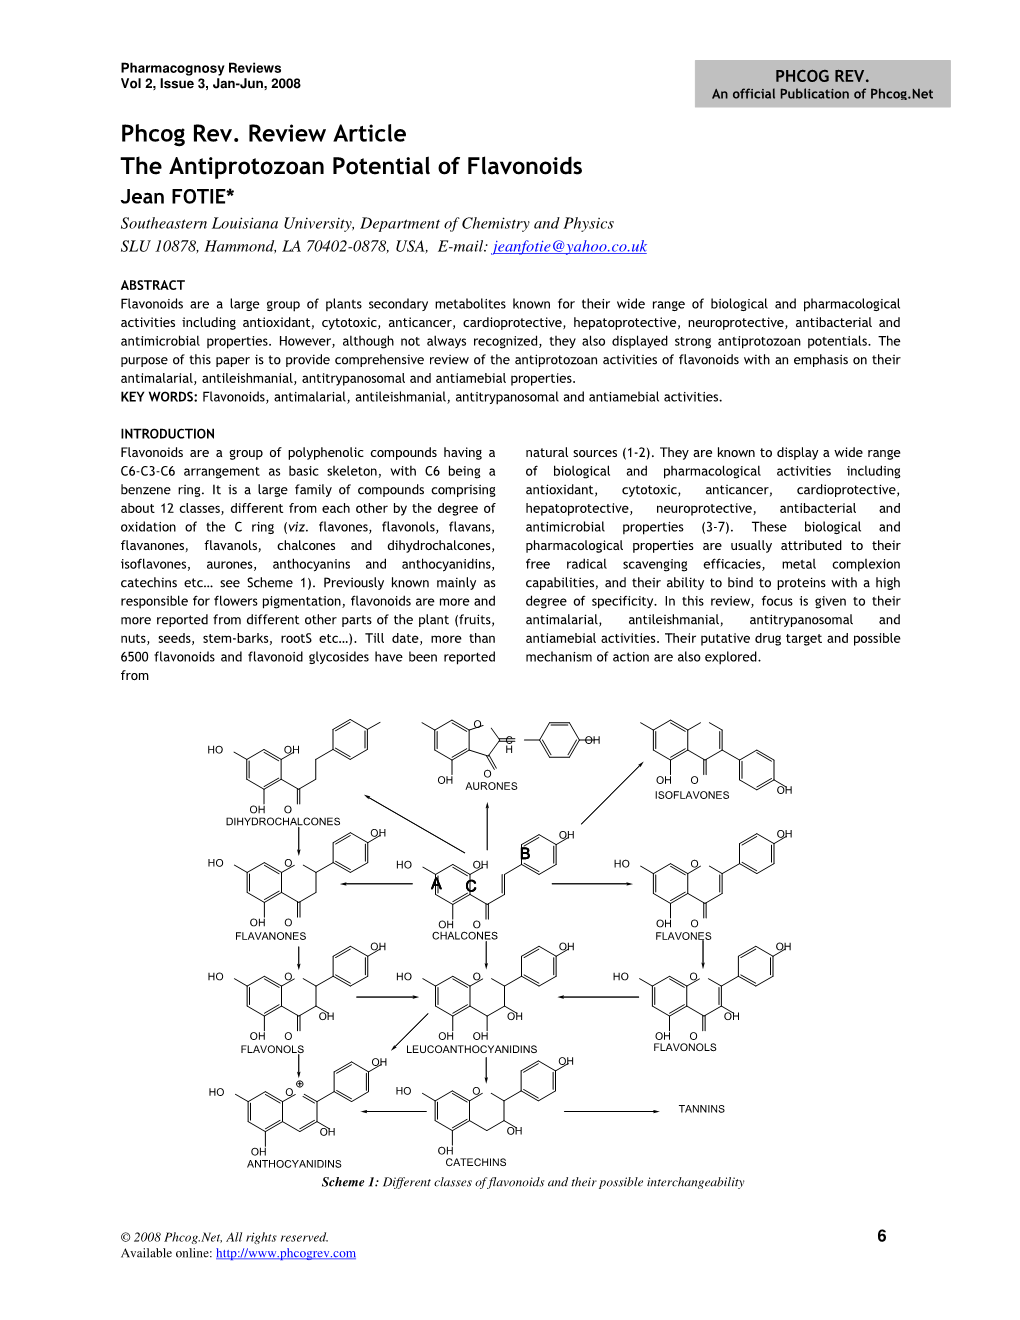 Phcog Rev. Review Article the Antiprotozoan Potential of Flavonoids